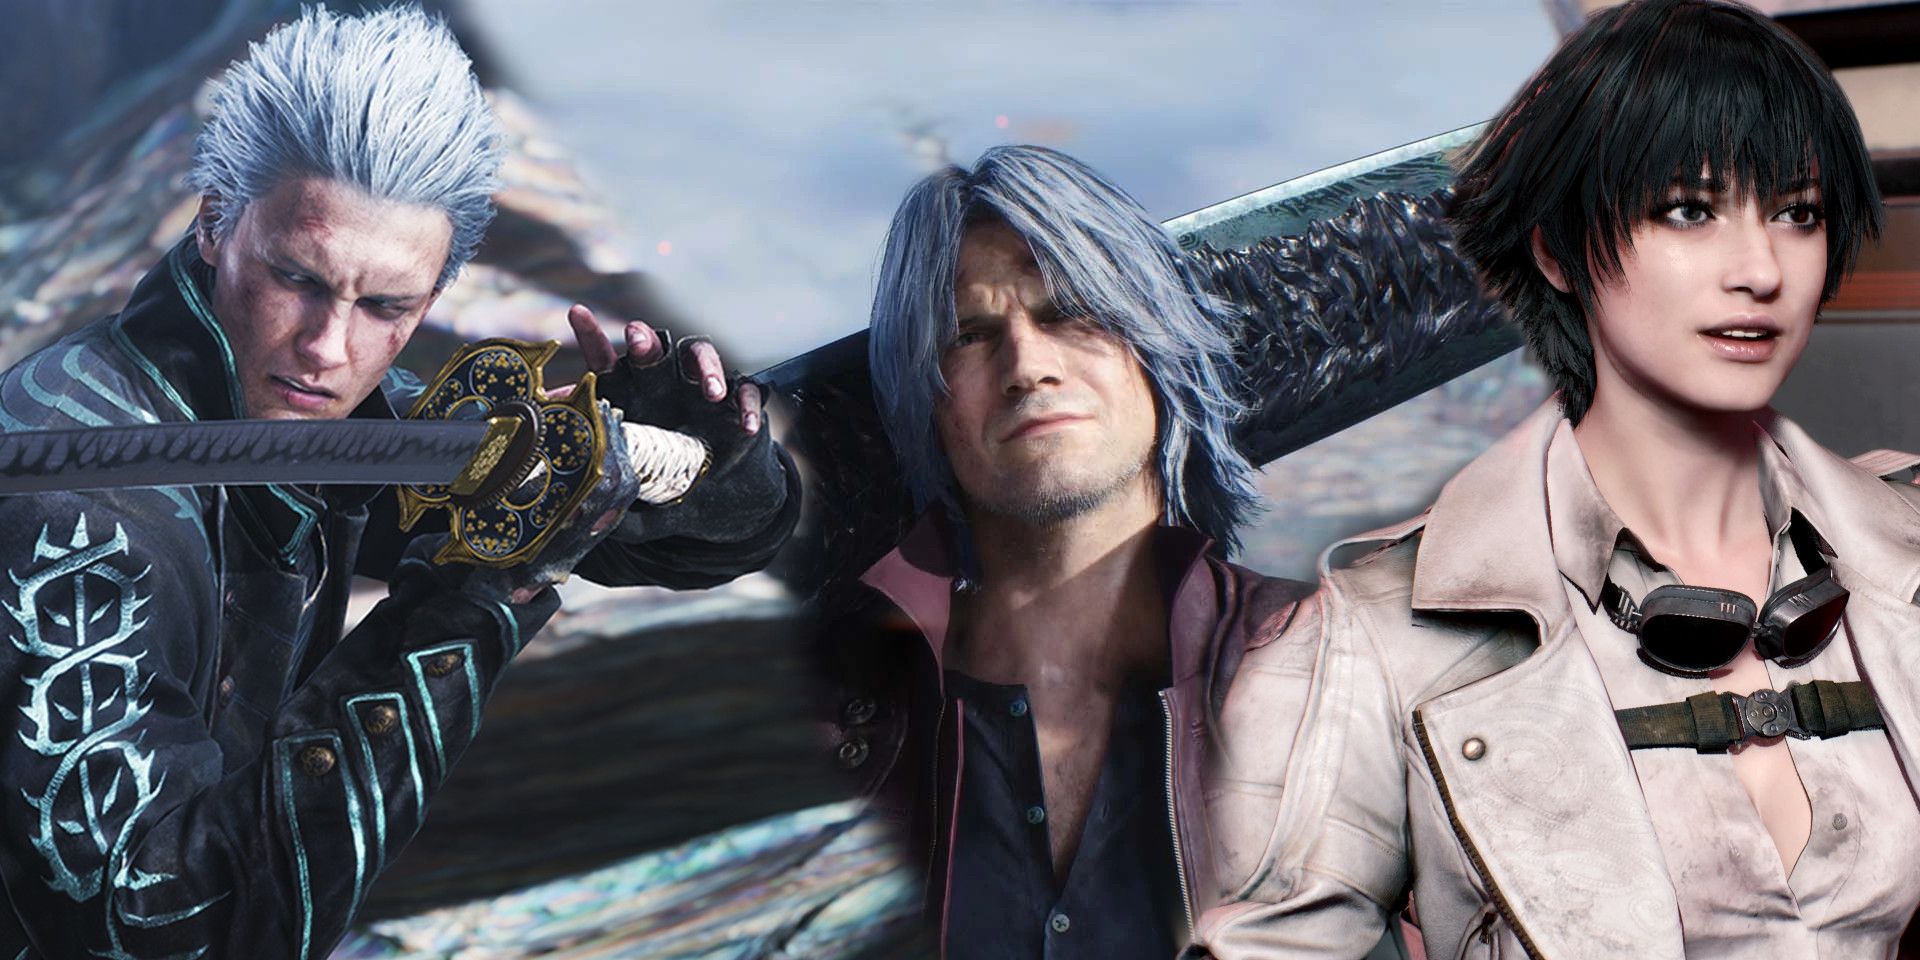 Dante, Lady, and Vergil confirmed for Netflix's Devil May Cry